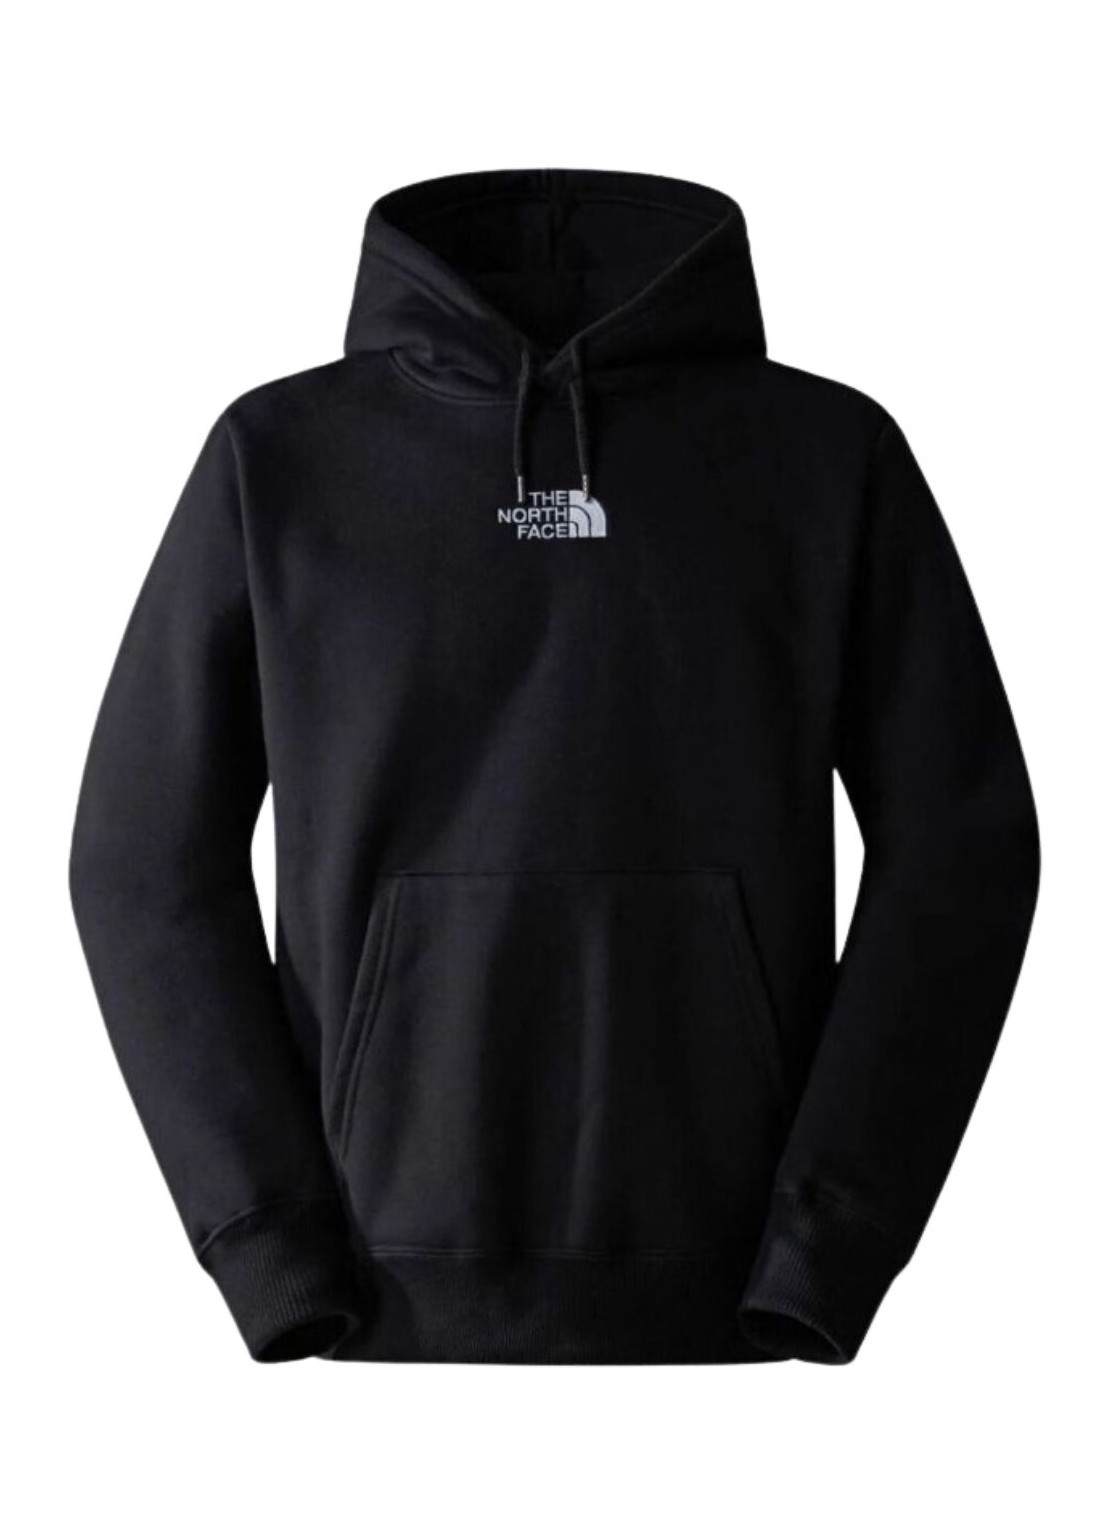 the north face men's heavyweight hoodie - nf0a84gkky41 ky41 Talla S